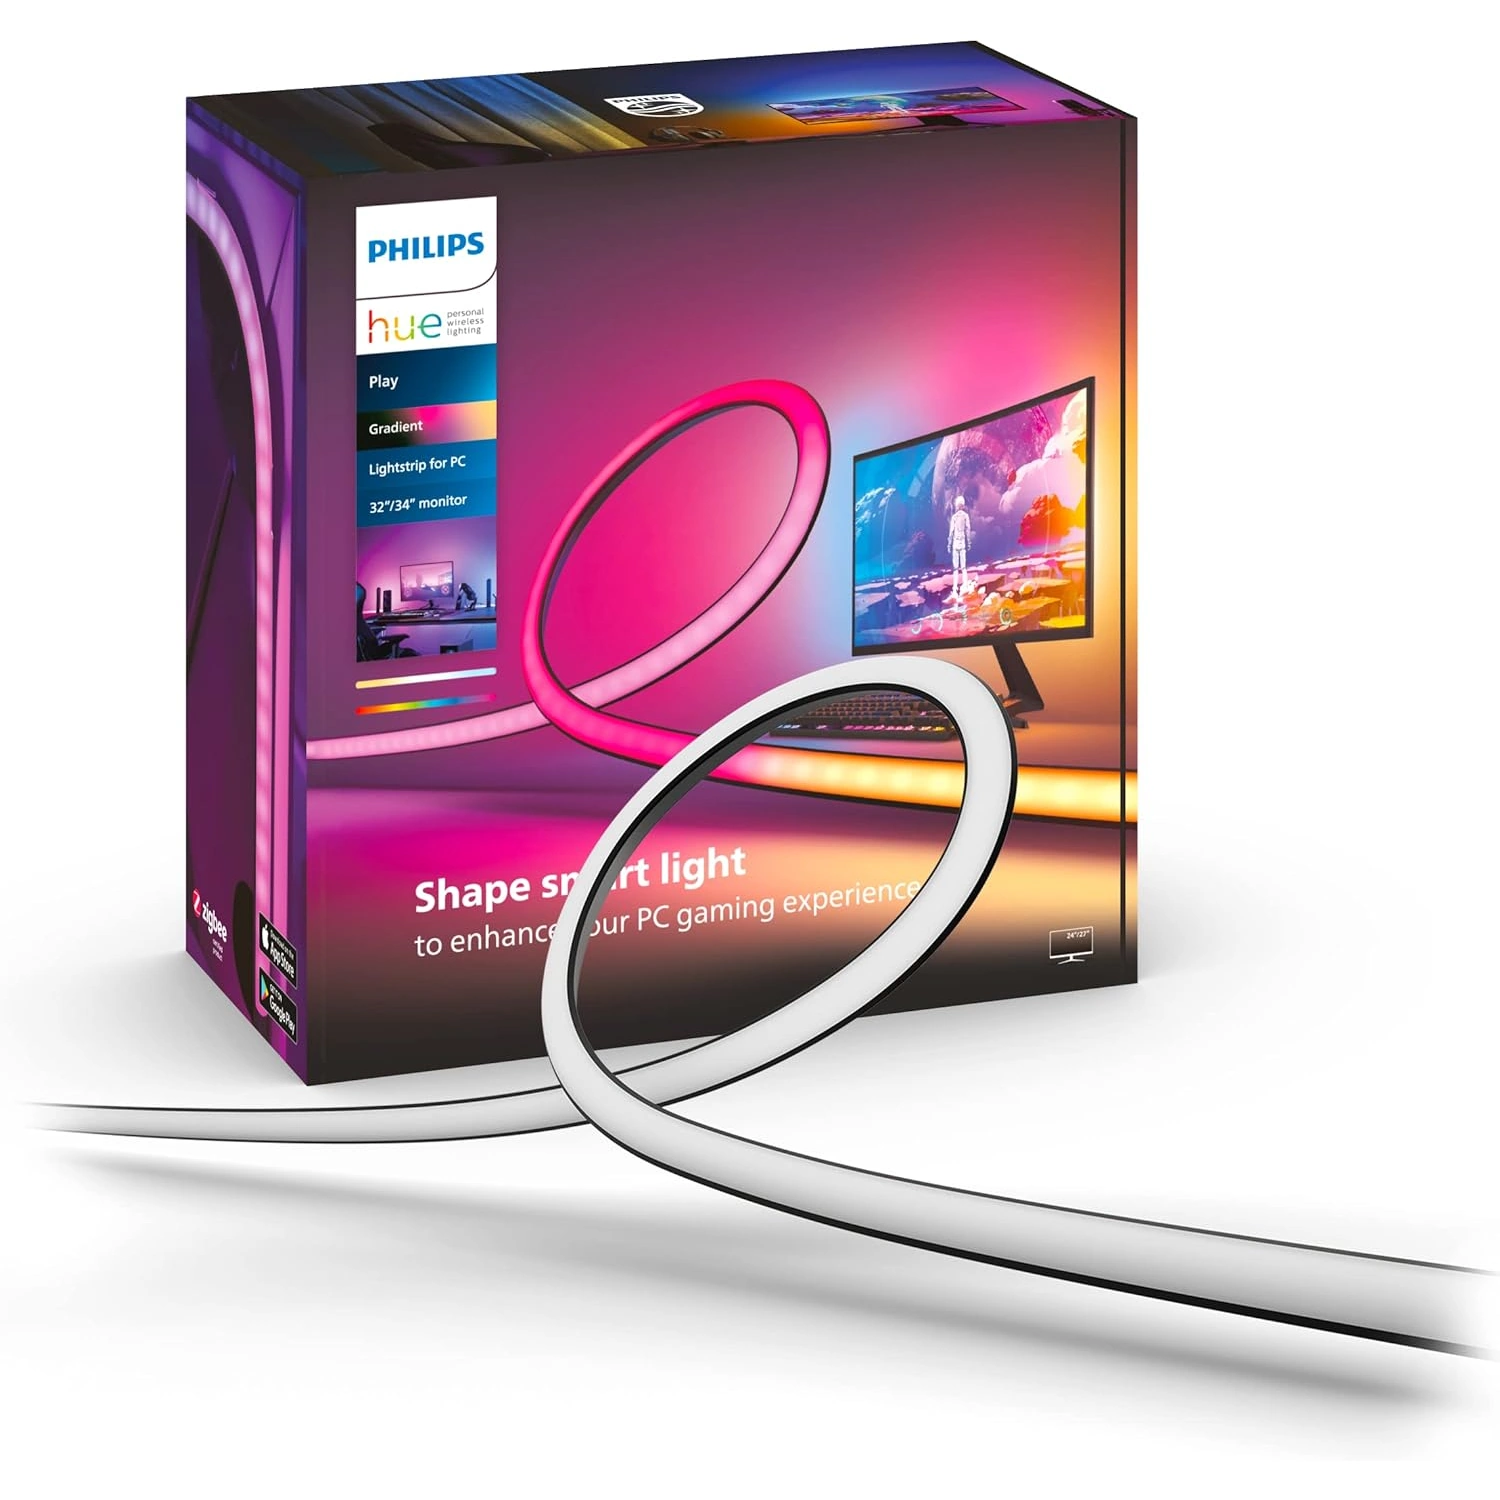 Hue Play Gradient Lightstrip for PC